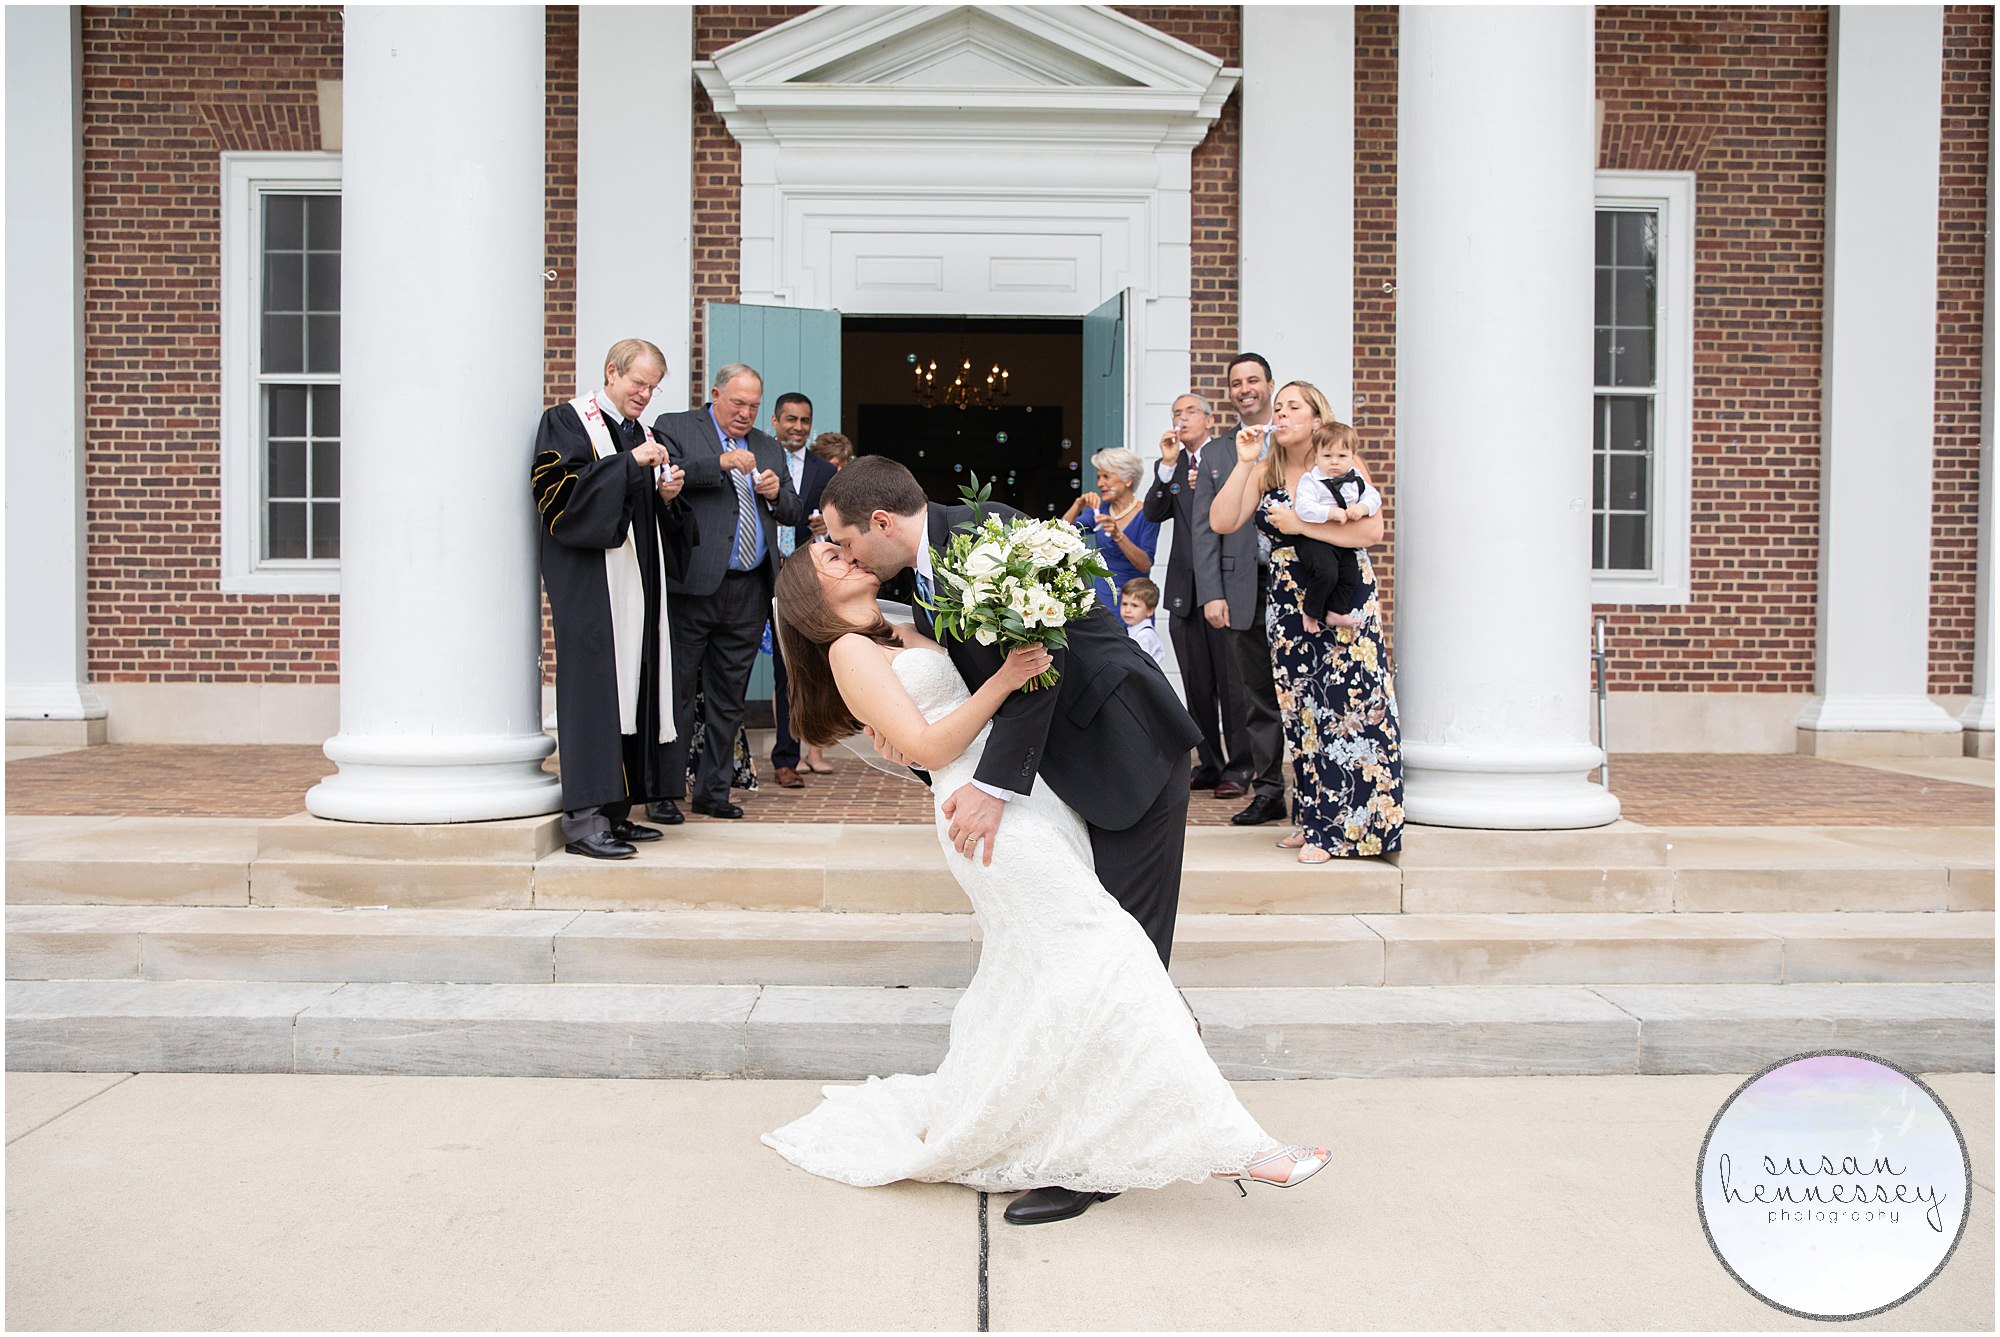 Bubble exit at NJ Micro Wedding in South Jersey